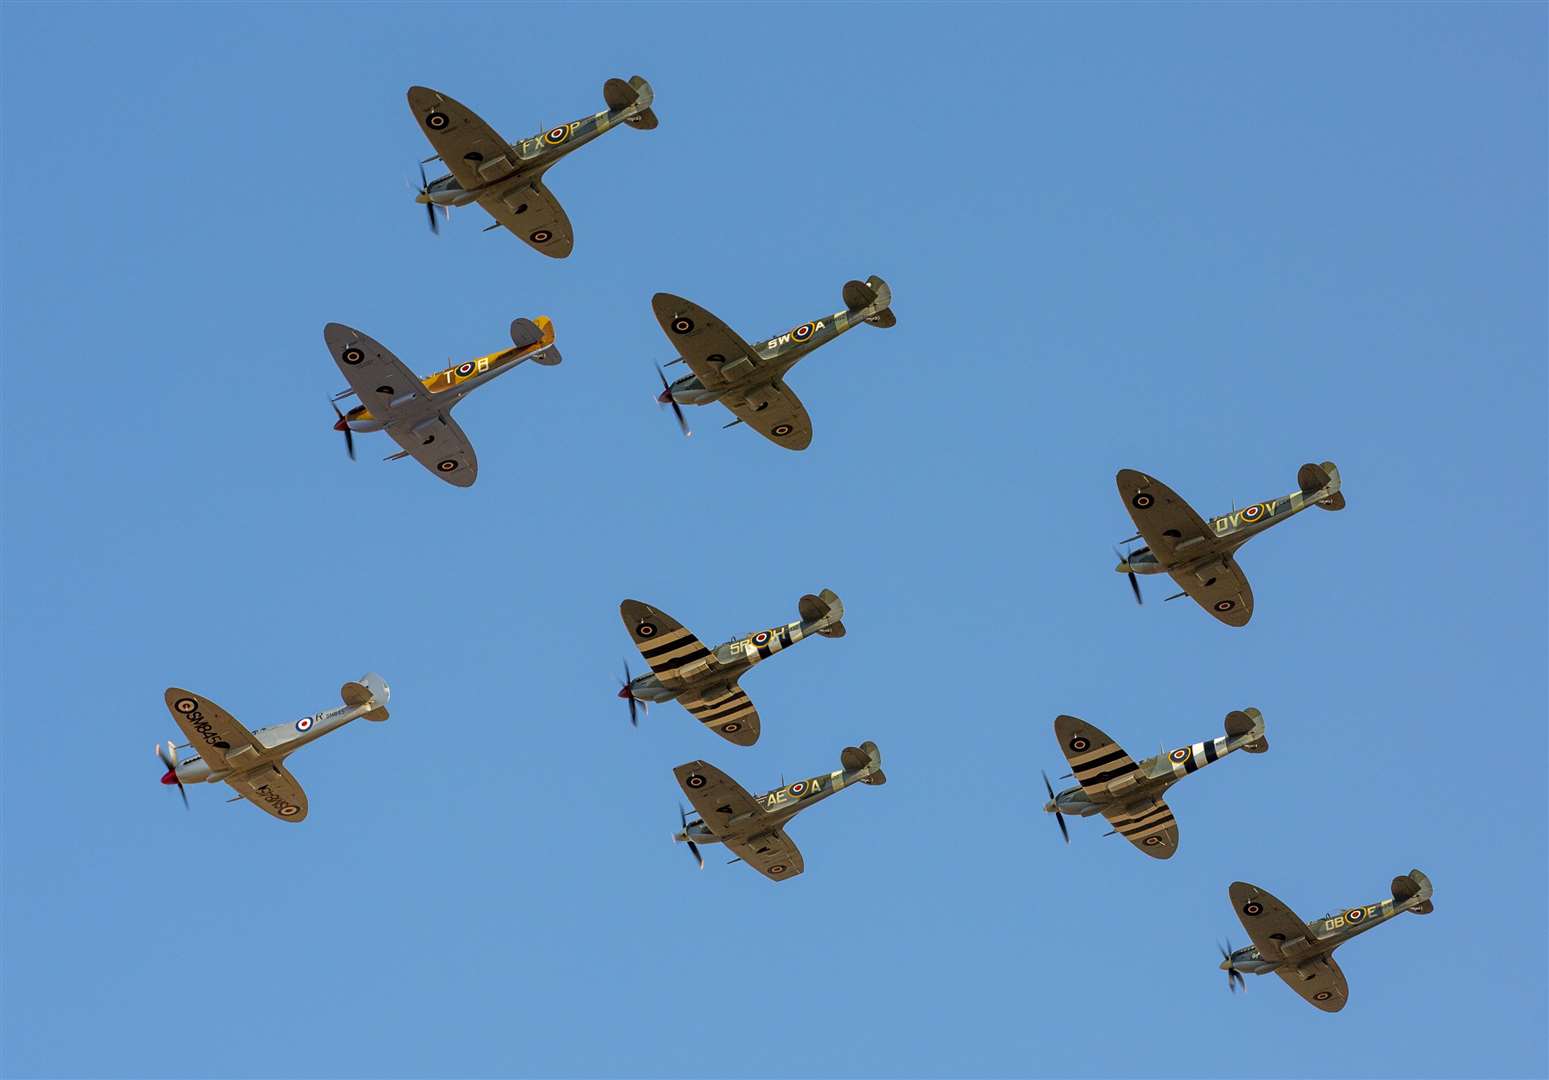 How it could look: the scene at the Duxford Battle of Britain Airshow in 2019